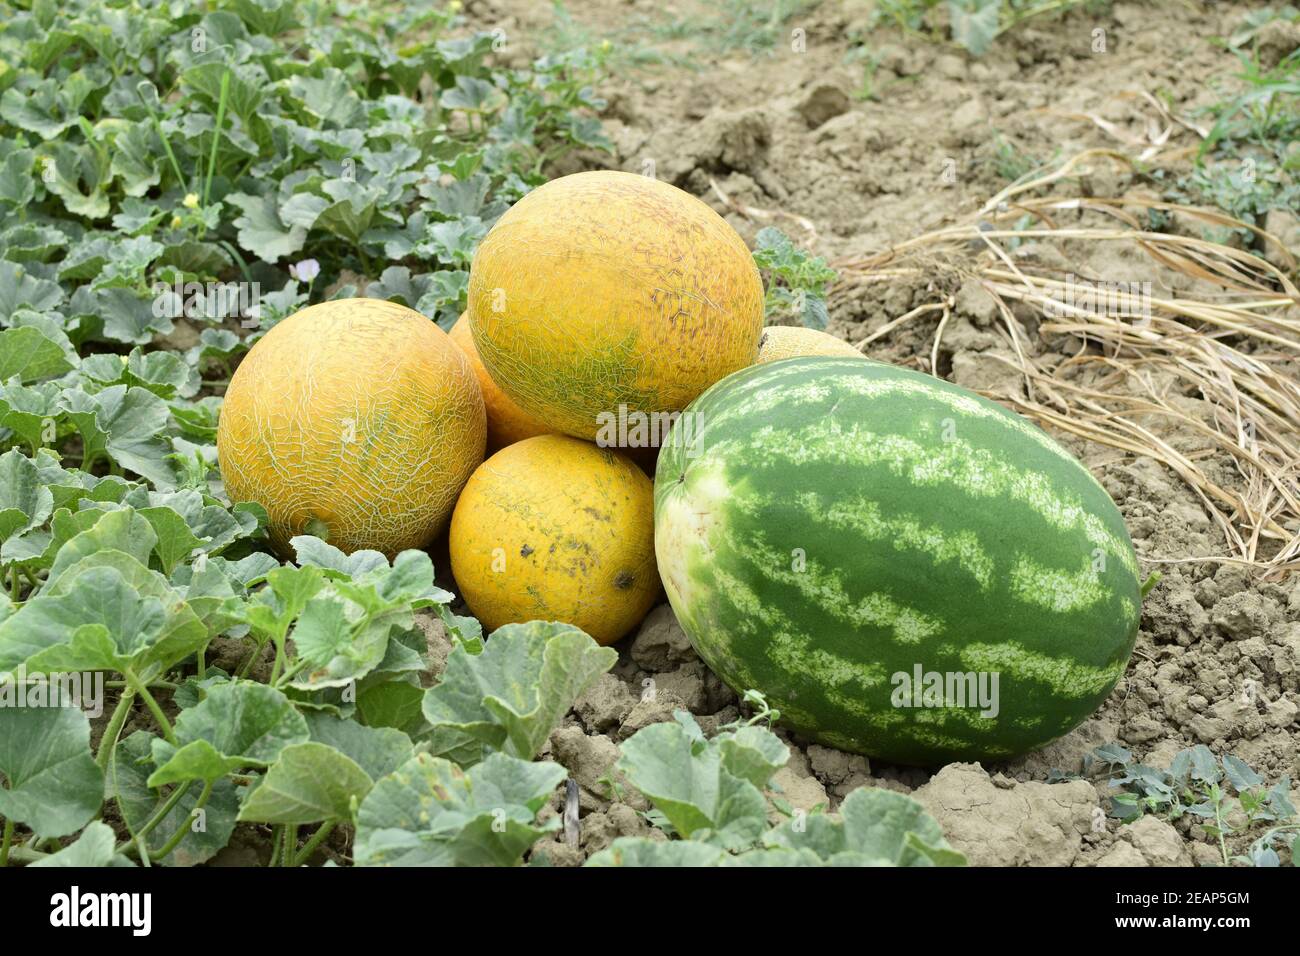 Ripe melon and watermelon the new harvest. Stock Photo